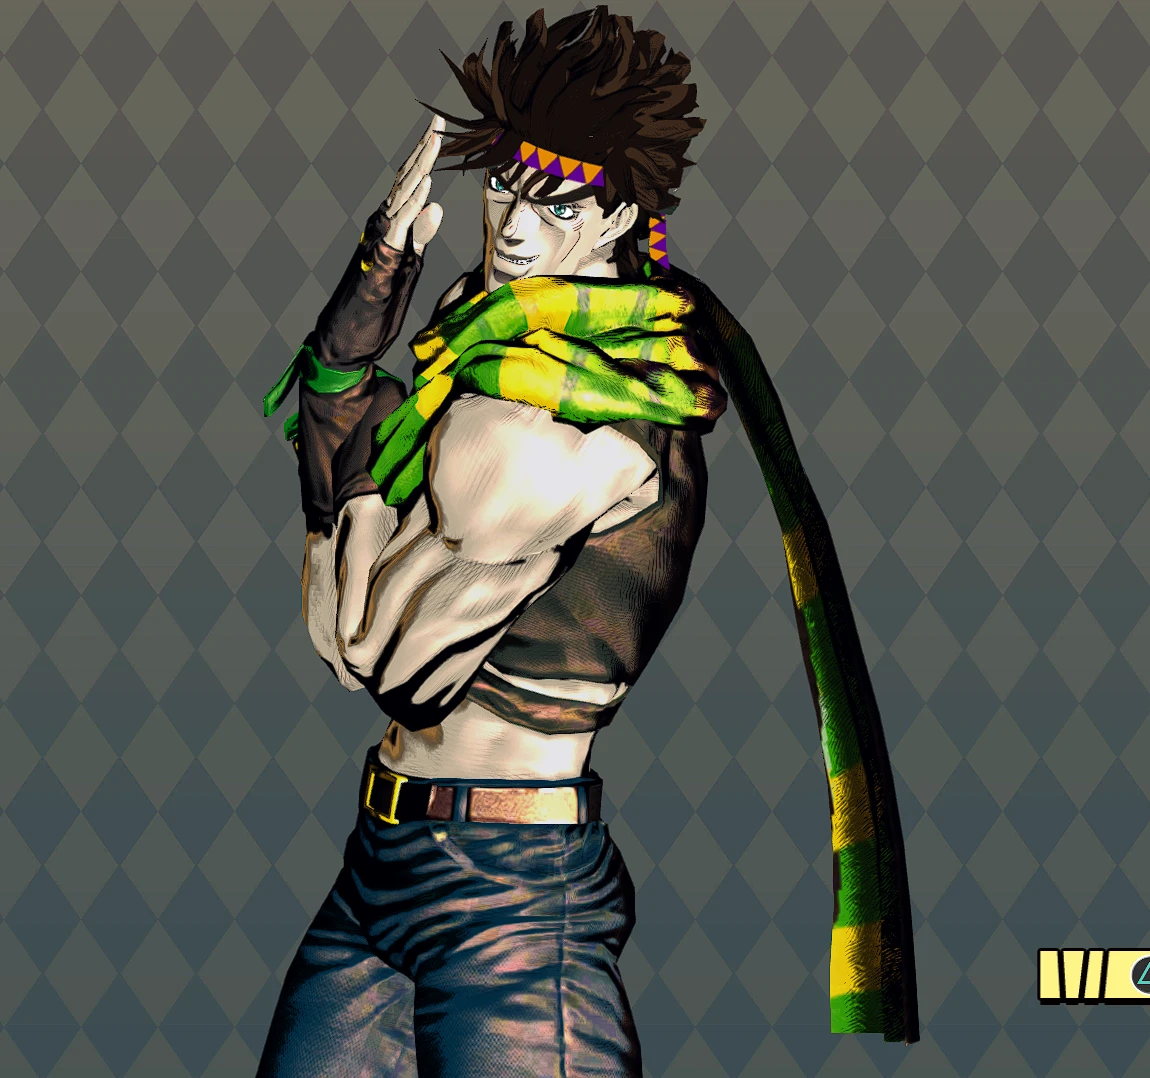 Young Joseph Joestar Costume  Carbon Costume  DIY DressUp Guides for  Cosplay  Halloween